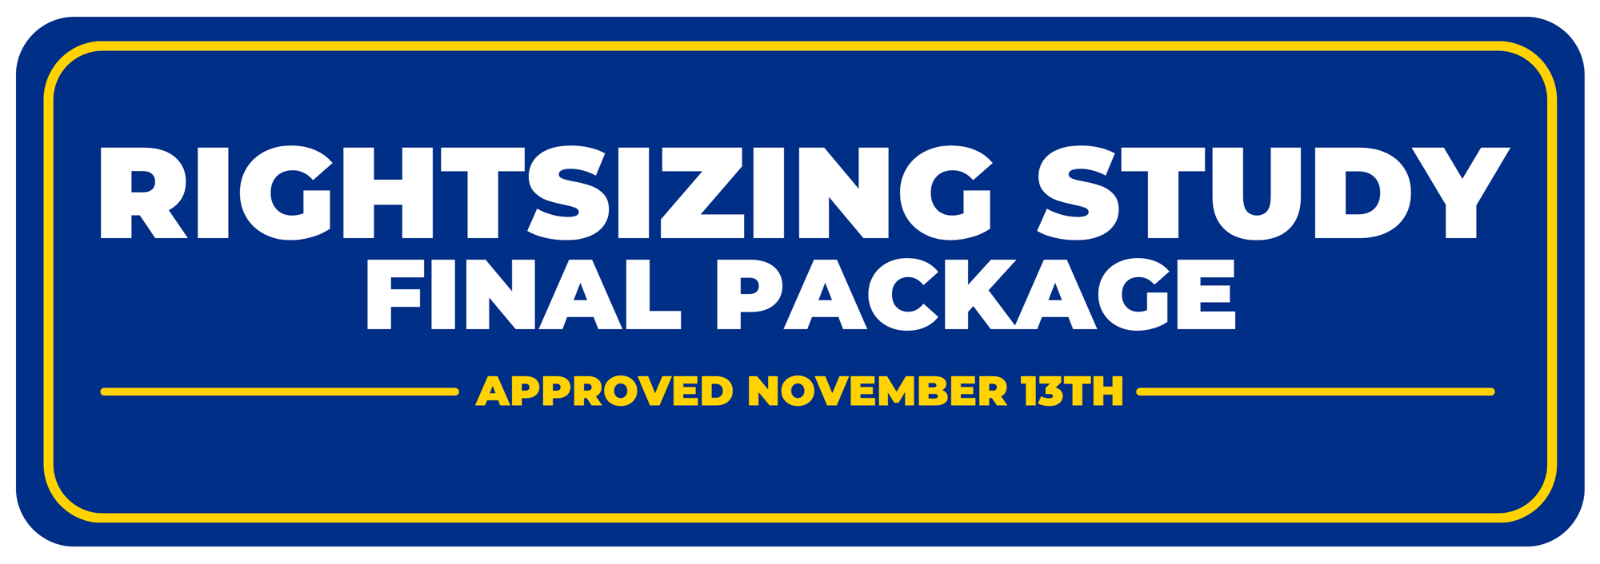 Rightsizing Study Final Package
Approved November 13th